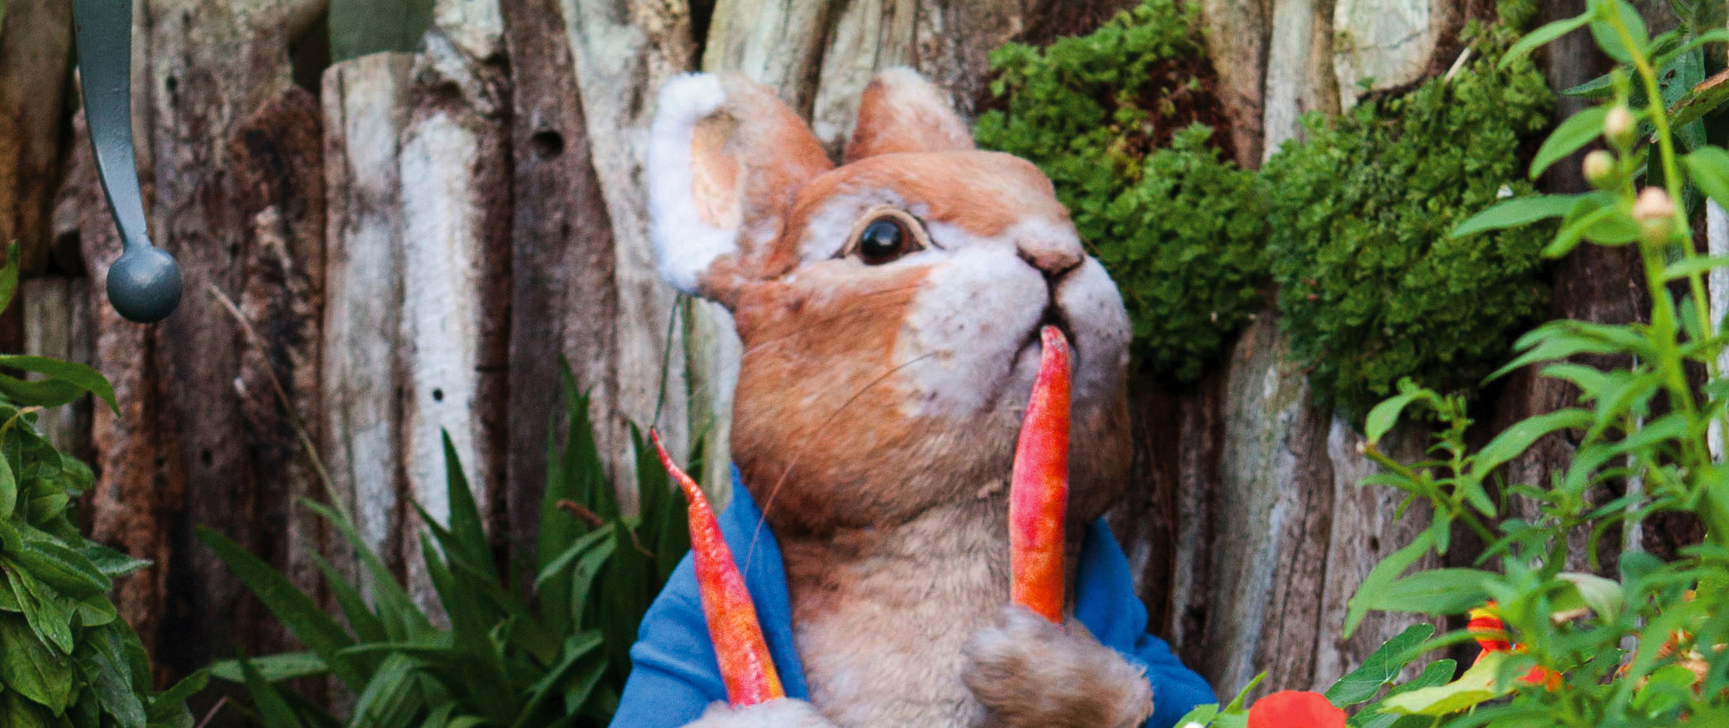 Peter Rabbit eating a carrot mannequin at the World of Beatrix Potter